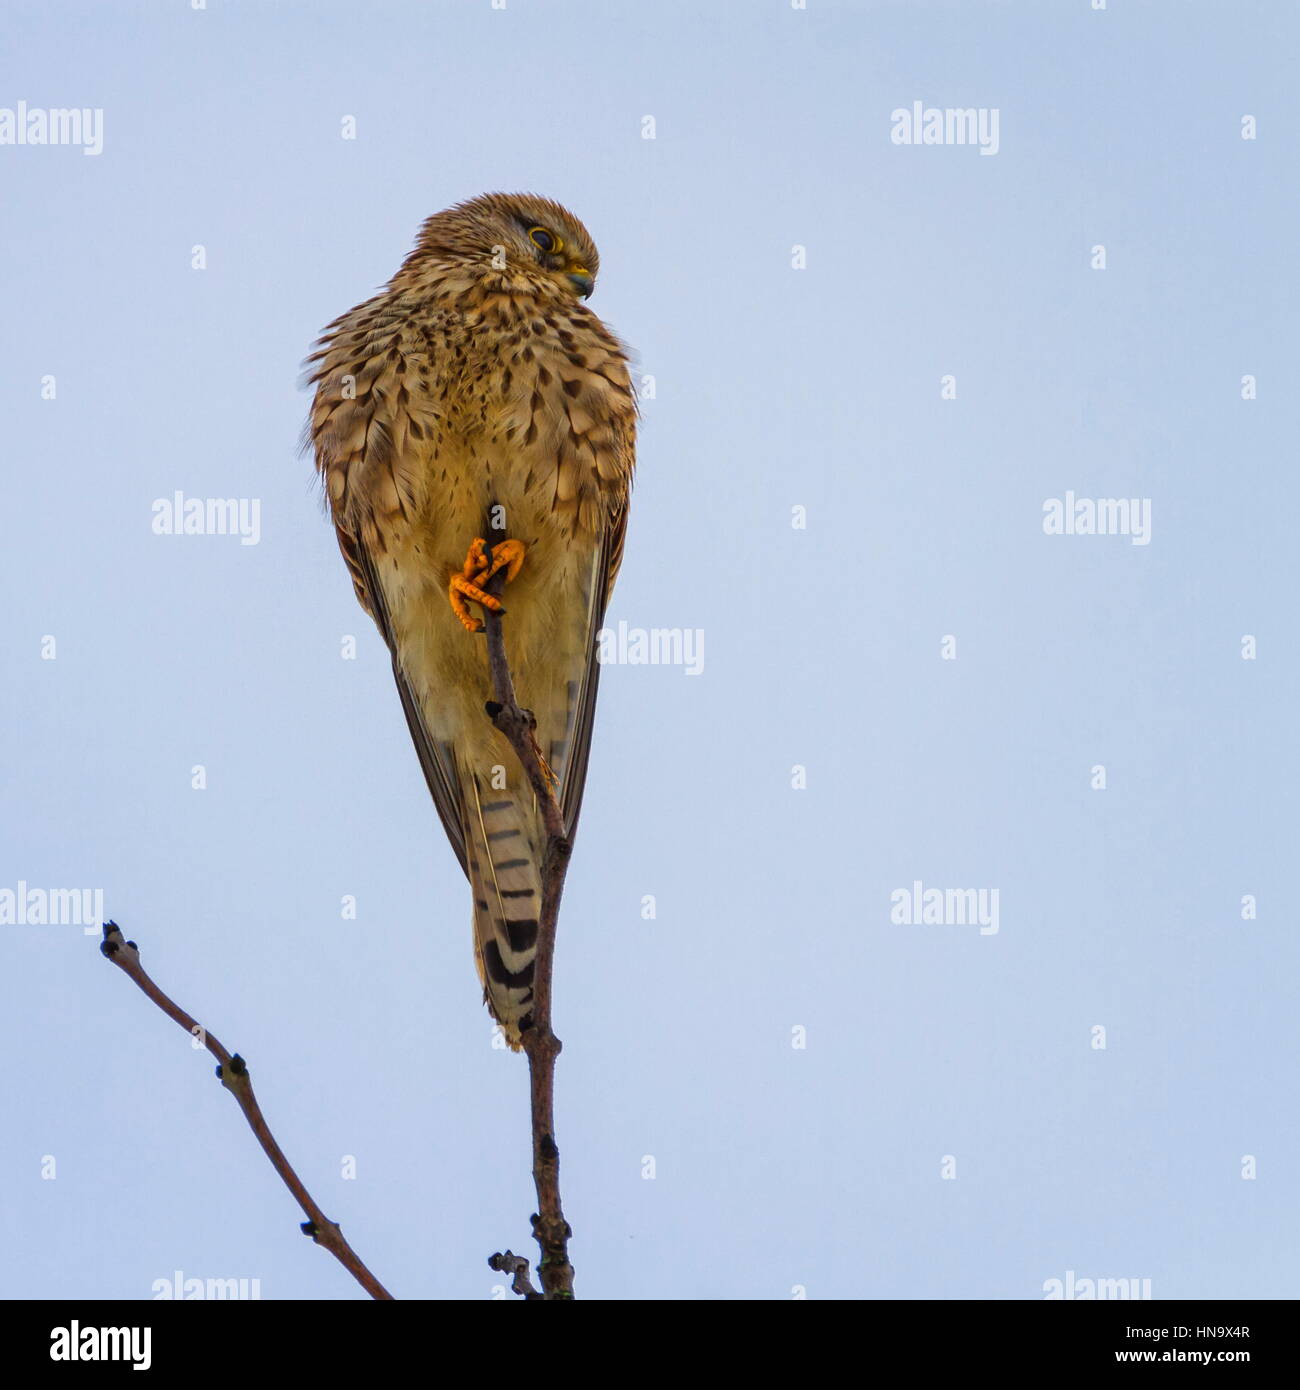 Female common kestrel, falco tinnunculus, standing on a small branch by day Stock Photo